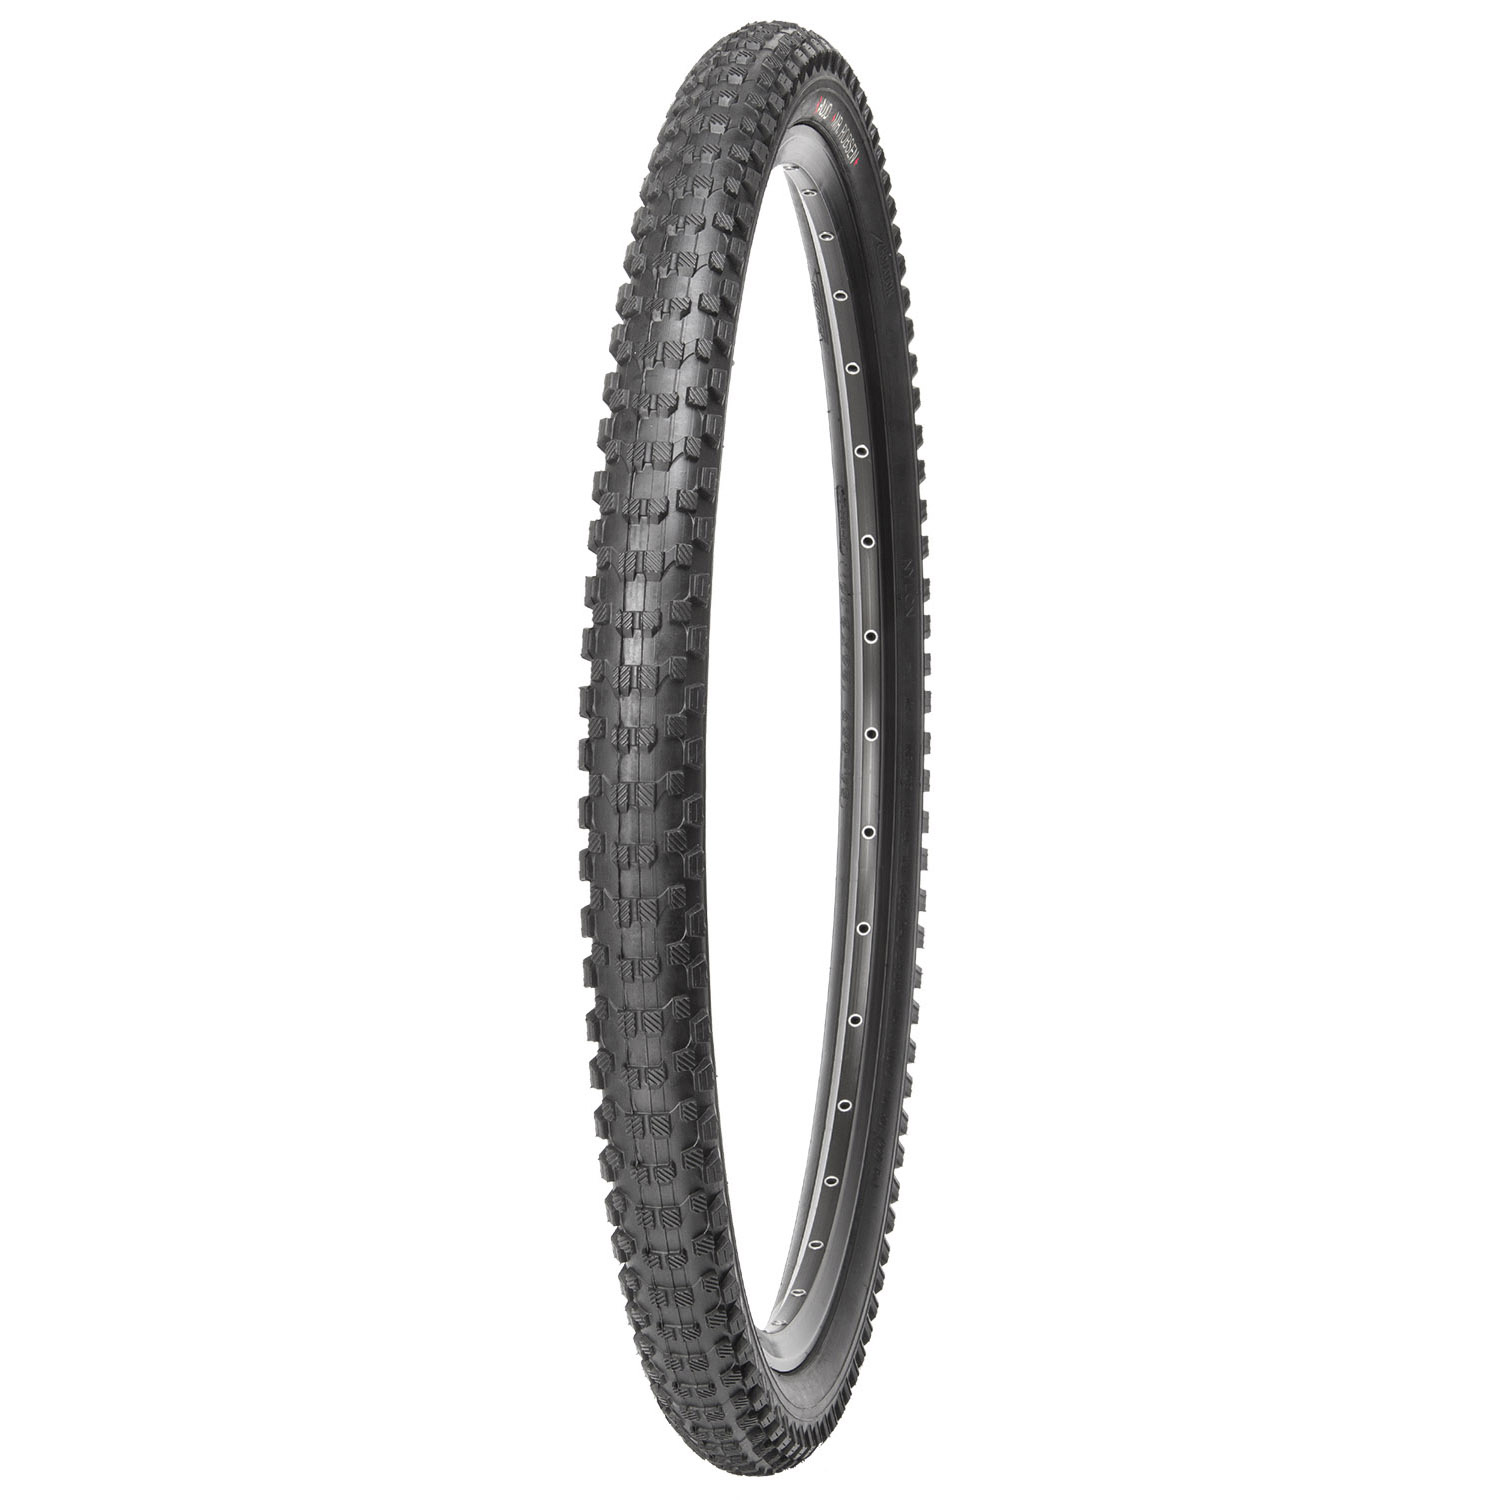 558066 – KUJO Mr. Robsen 26 x 2.10″ Clincher – AVAILABLE IN SELECTED BIKE SHOPS